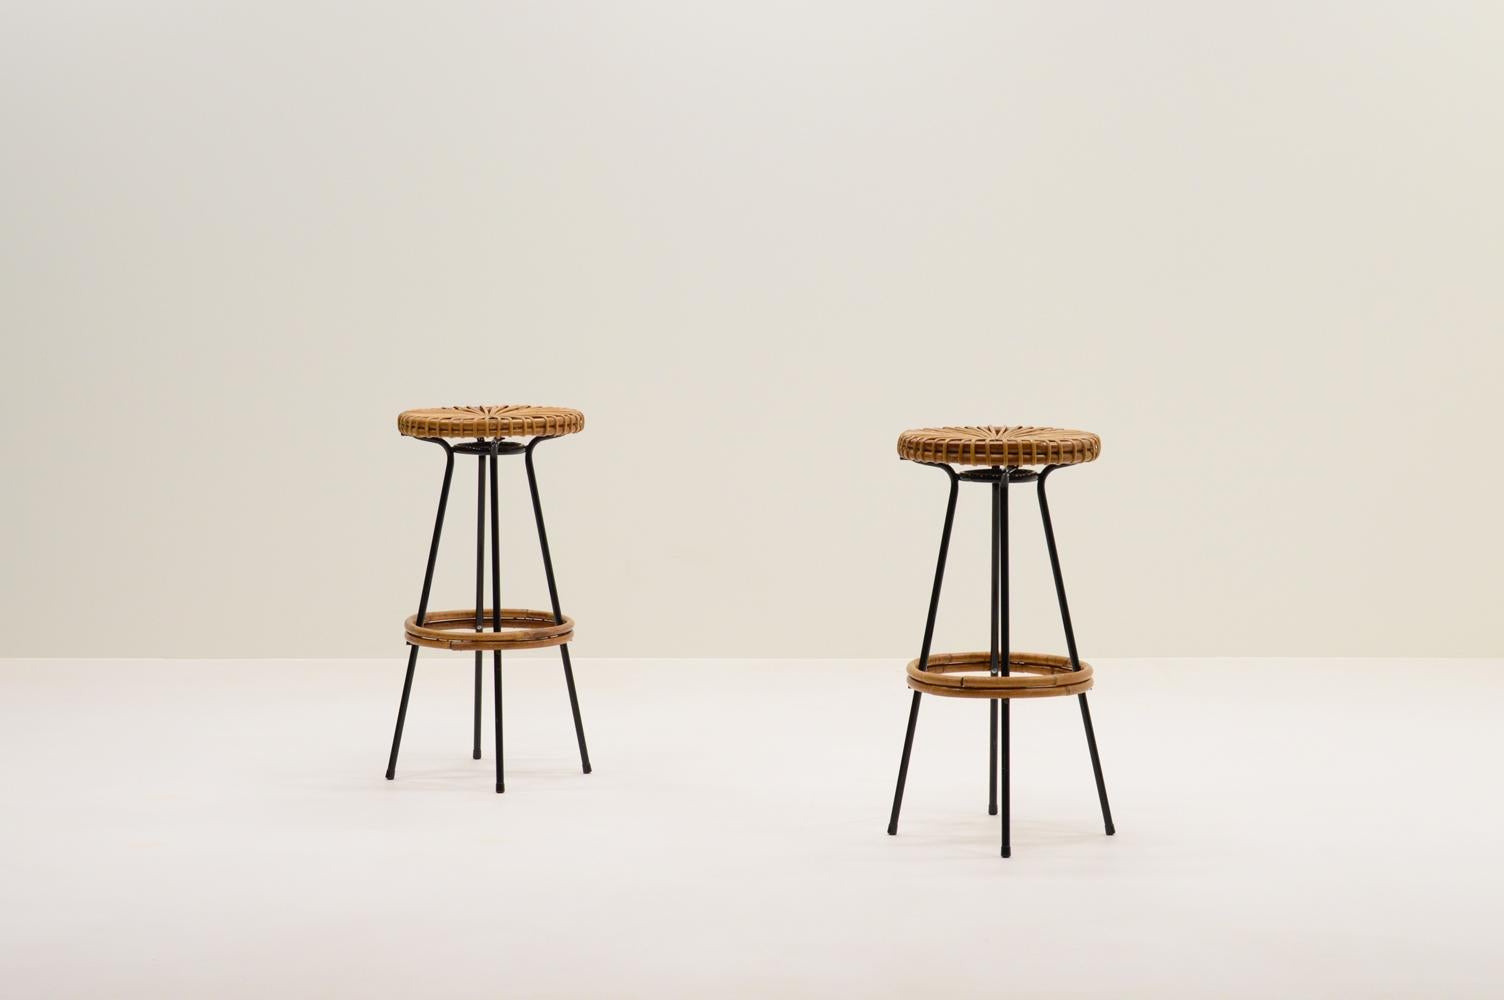 Set of 2 bar stools by Dirk van Sliedregt for Rohé Noordwolde, 1960s The Netherlands. Black laquered metal frame with rattan seat and footring. In very good vintage condition.

Request a quote for the latest shipping rates.